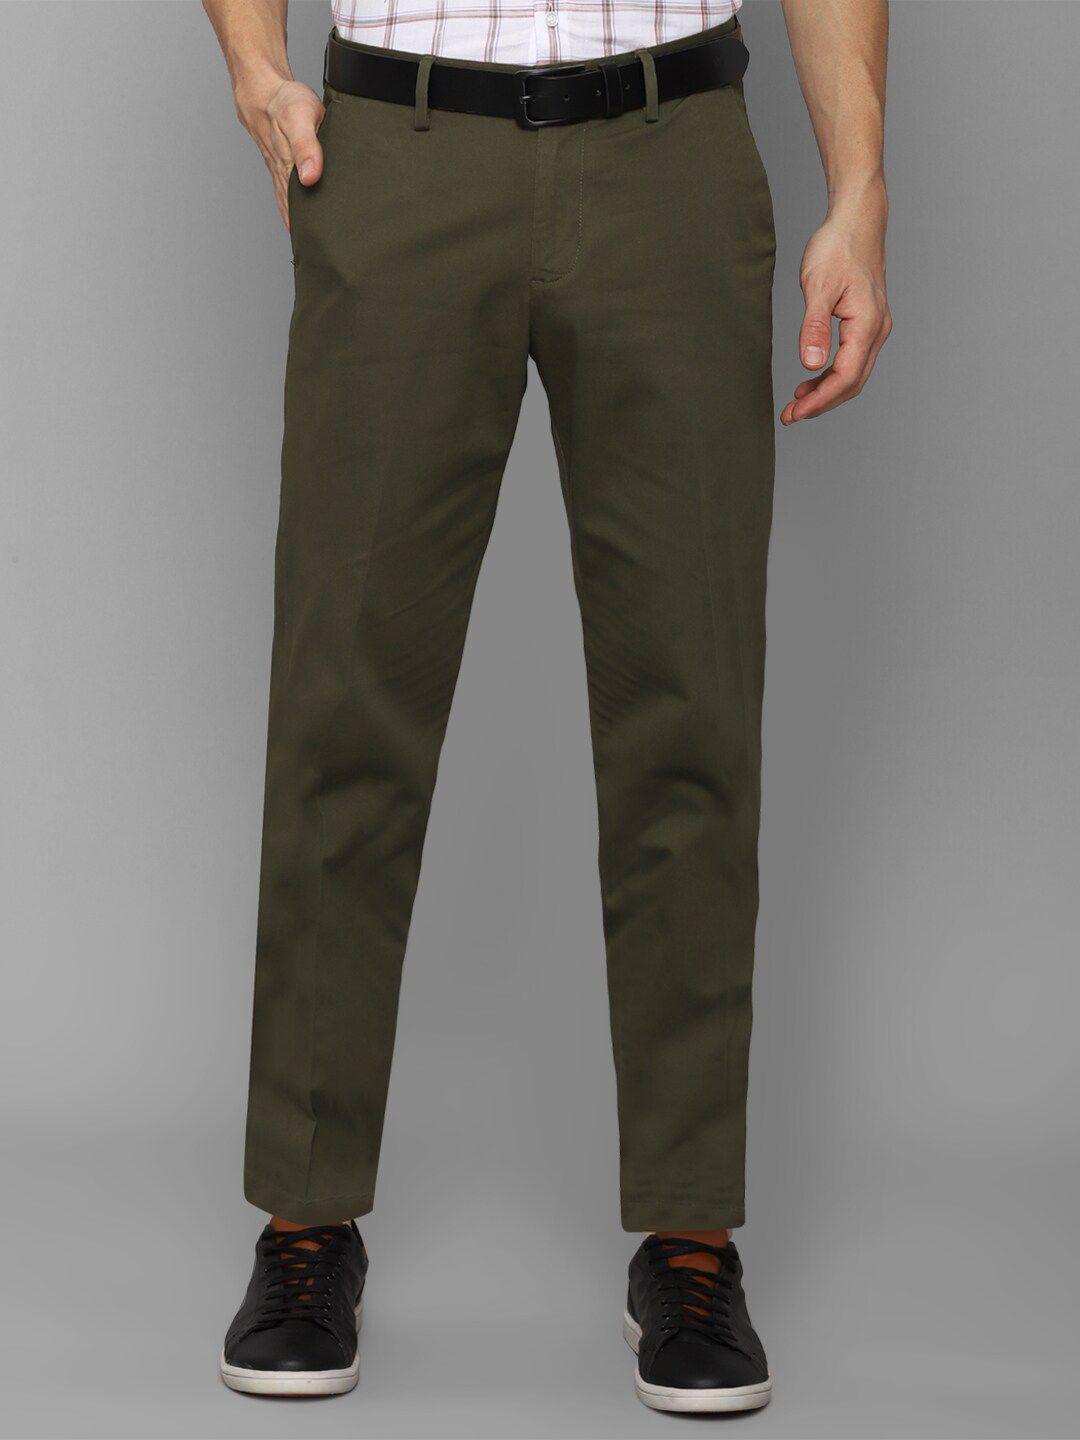 allen-solly-men-olive-green-slim-fit-casual-trousers